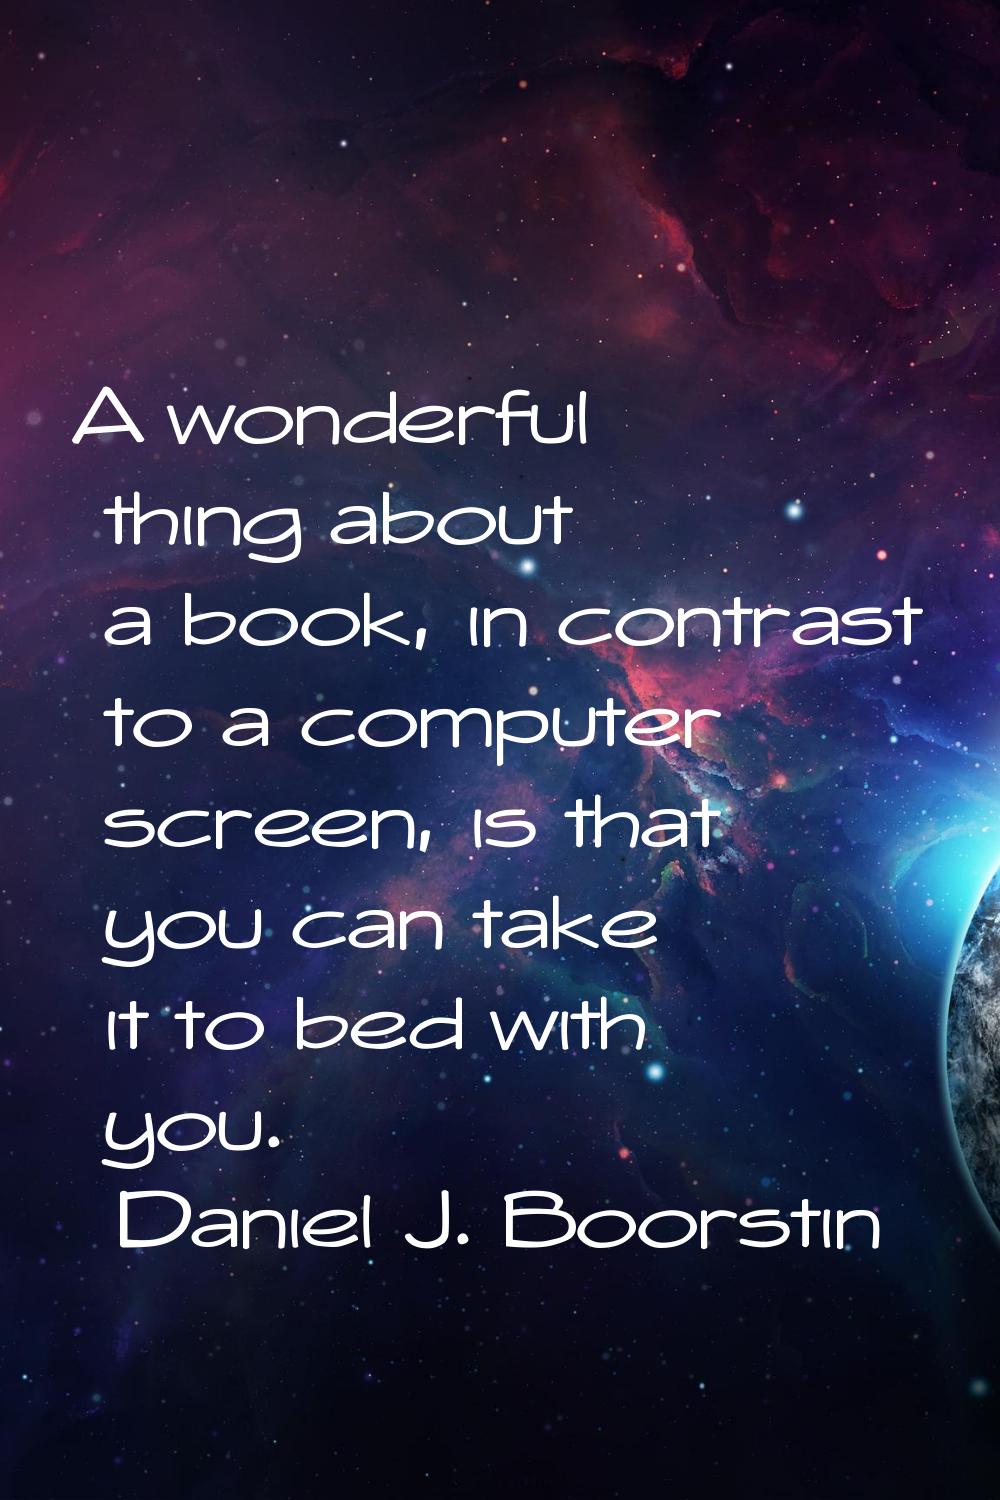 A wonderful thing about a book, in contrast to a computer screen, is that you can take it to bed wi